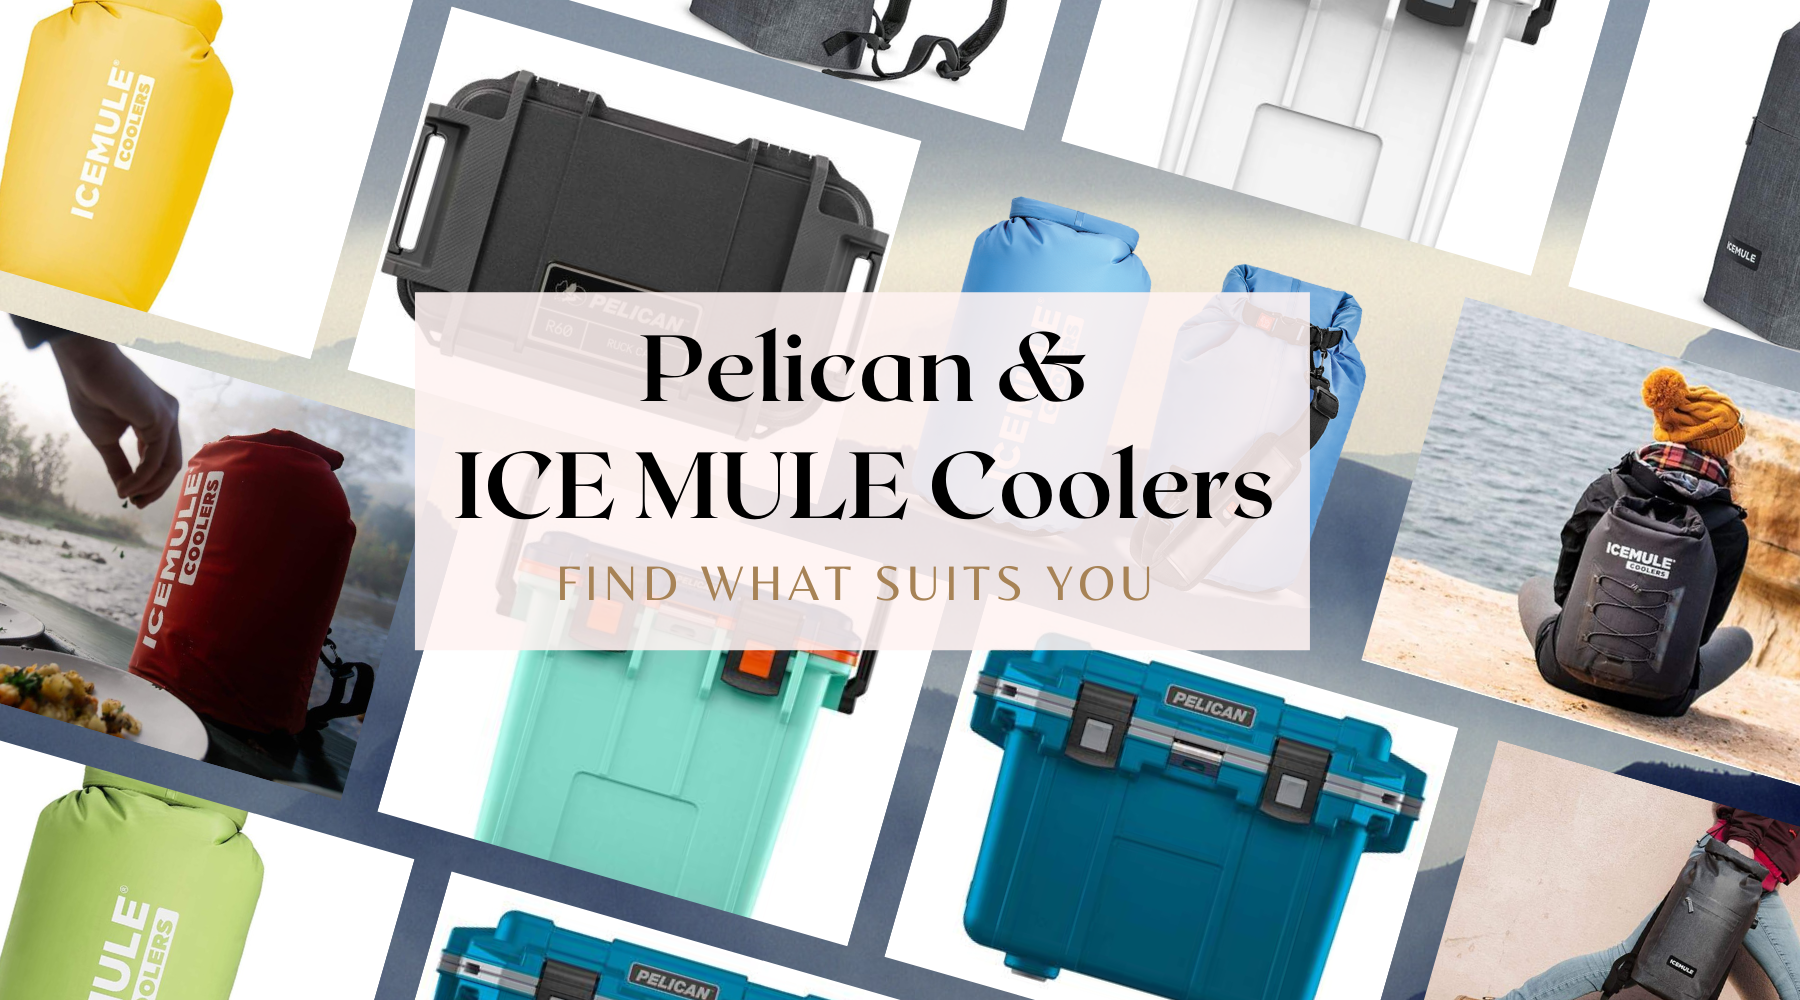 Pelican and ICE MULE Coolers: which is the right fit for YOU?